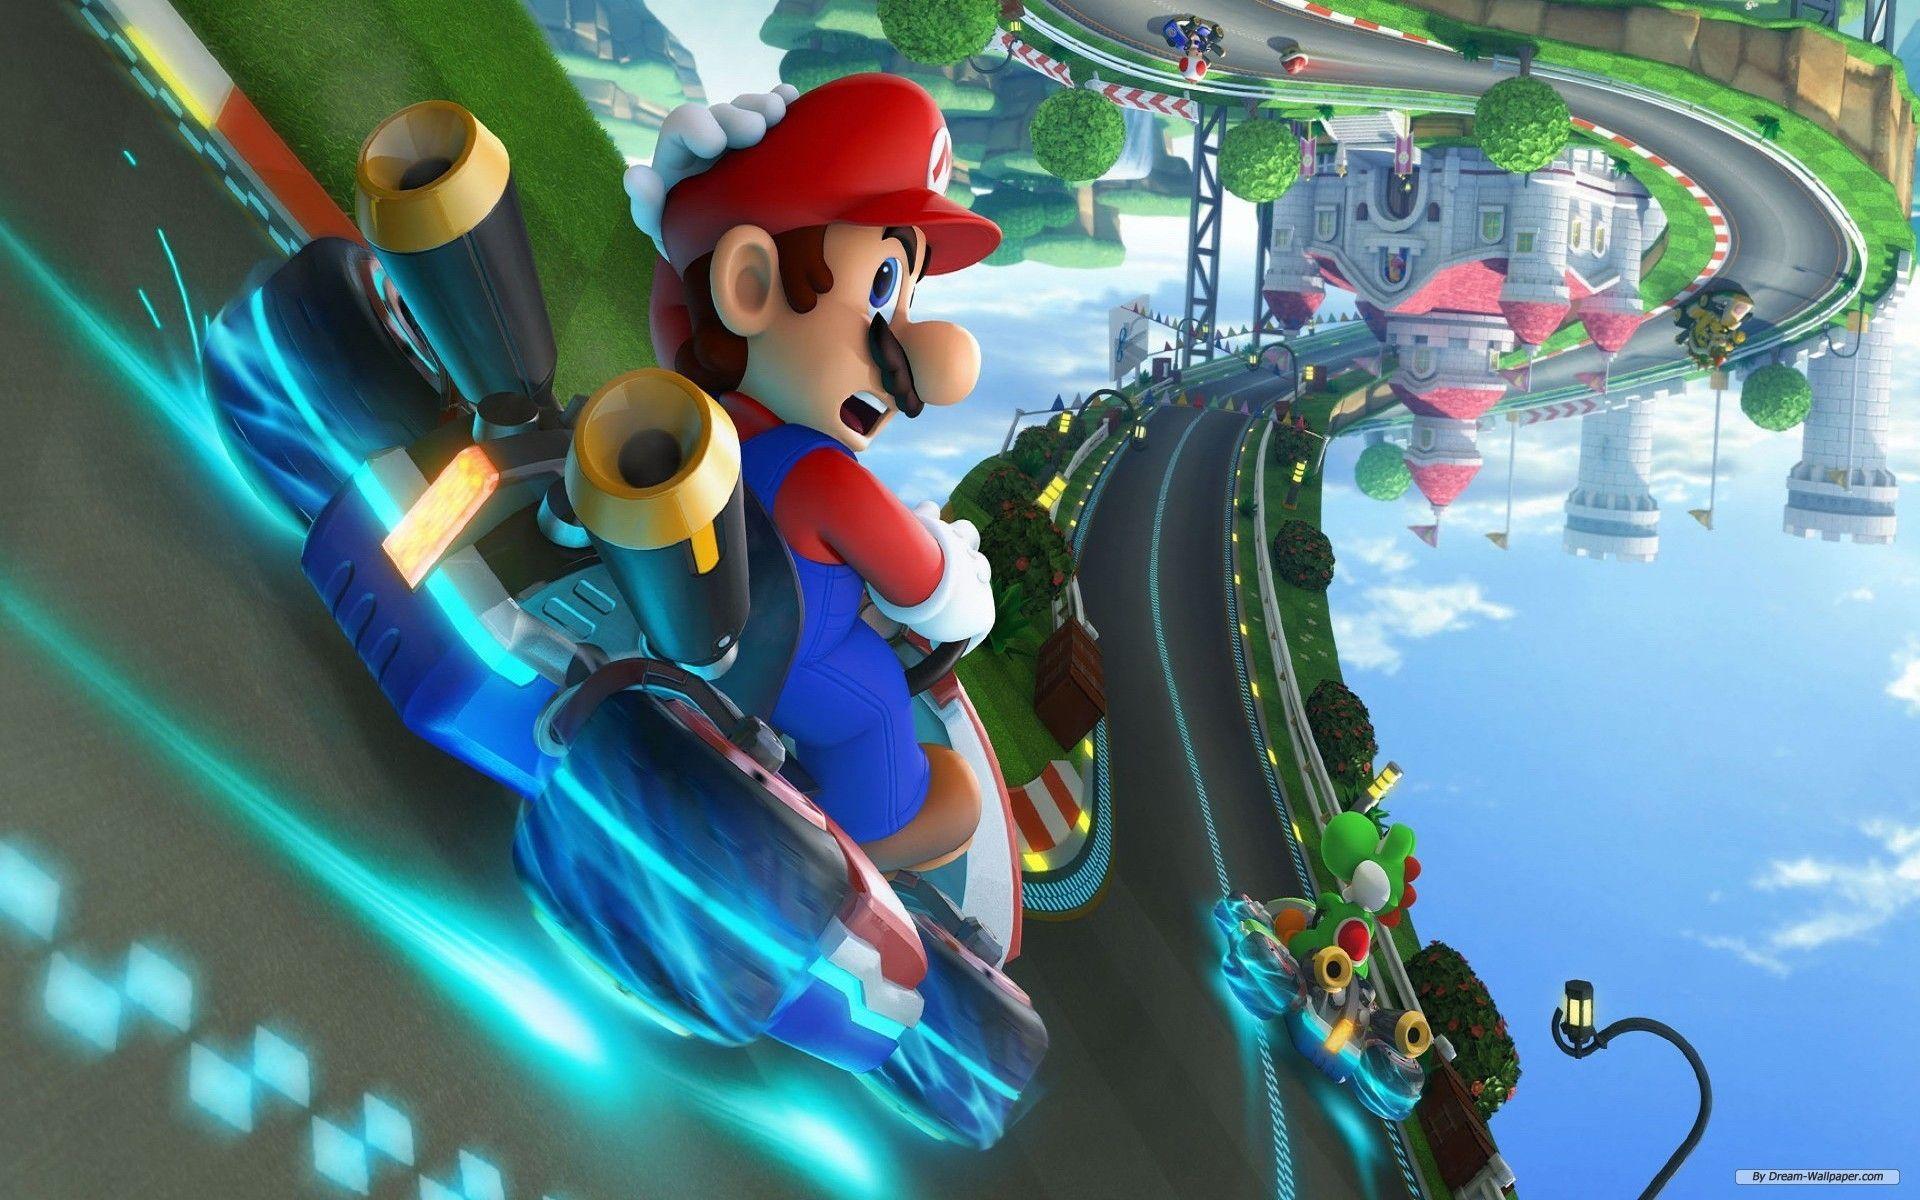 Download Mario Kart 8 Deluxe wallpapers for mobile phone free Mario  Kart 8 Deluxe HD pictures